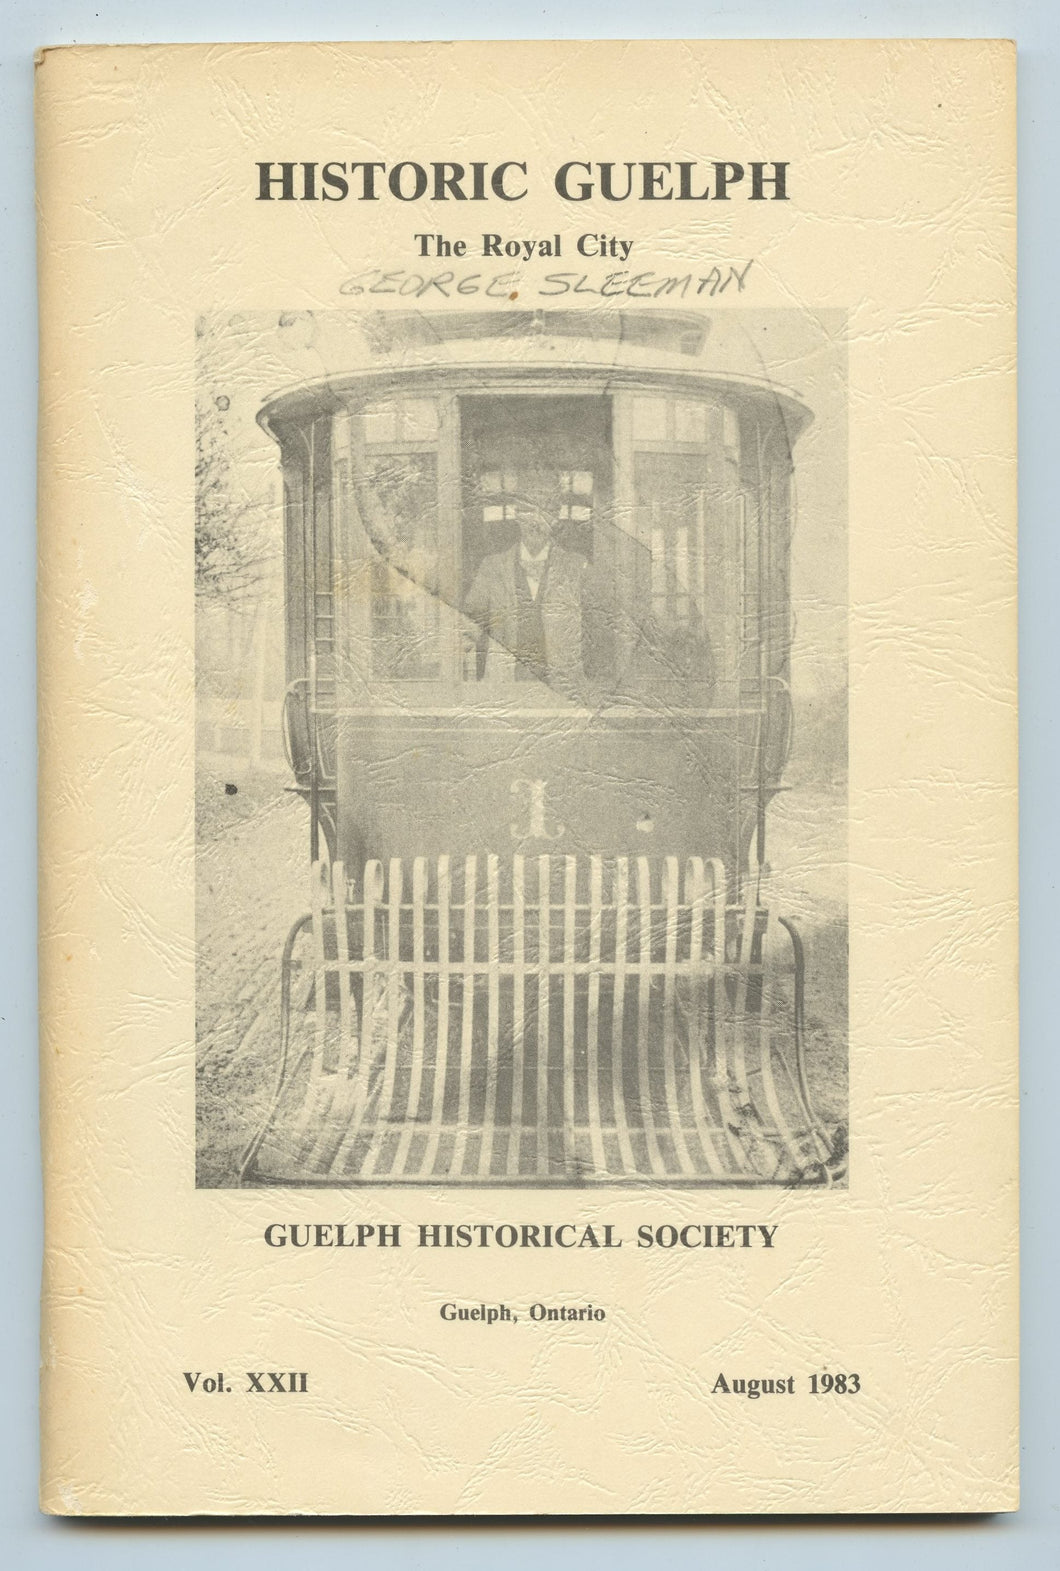 Historic Guelph: The Royal City, Volume XXII, 1982-83